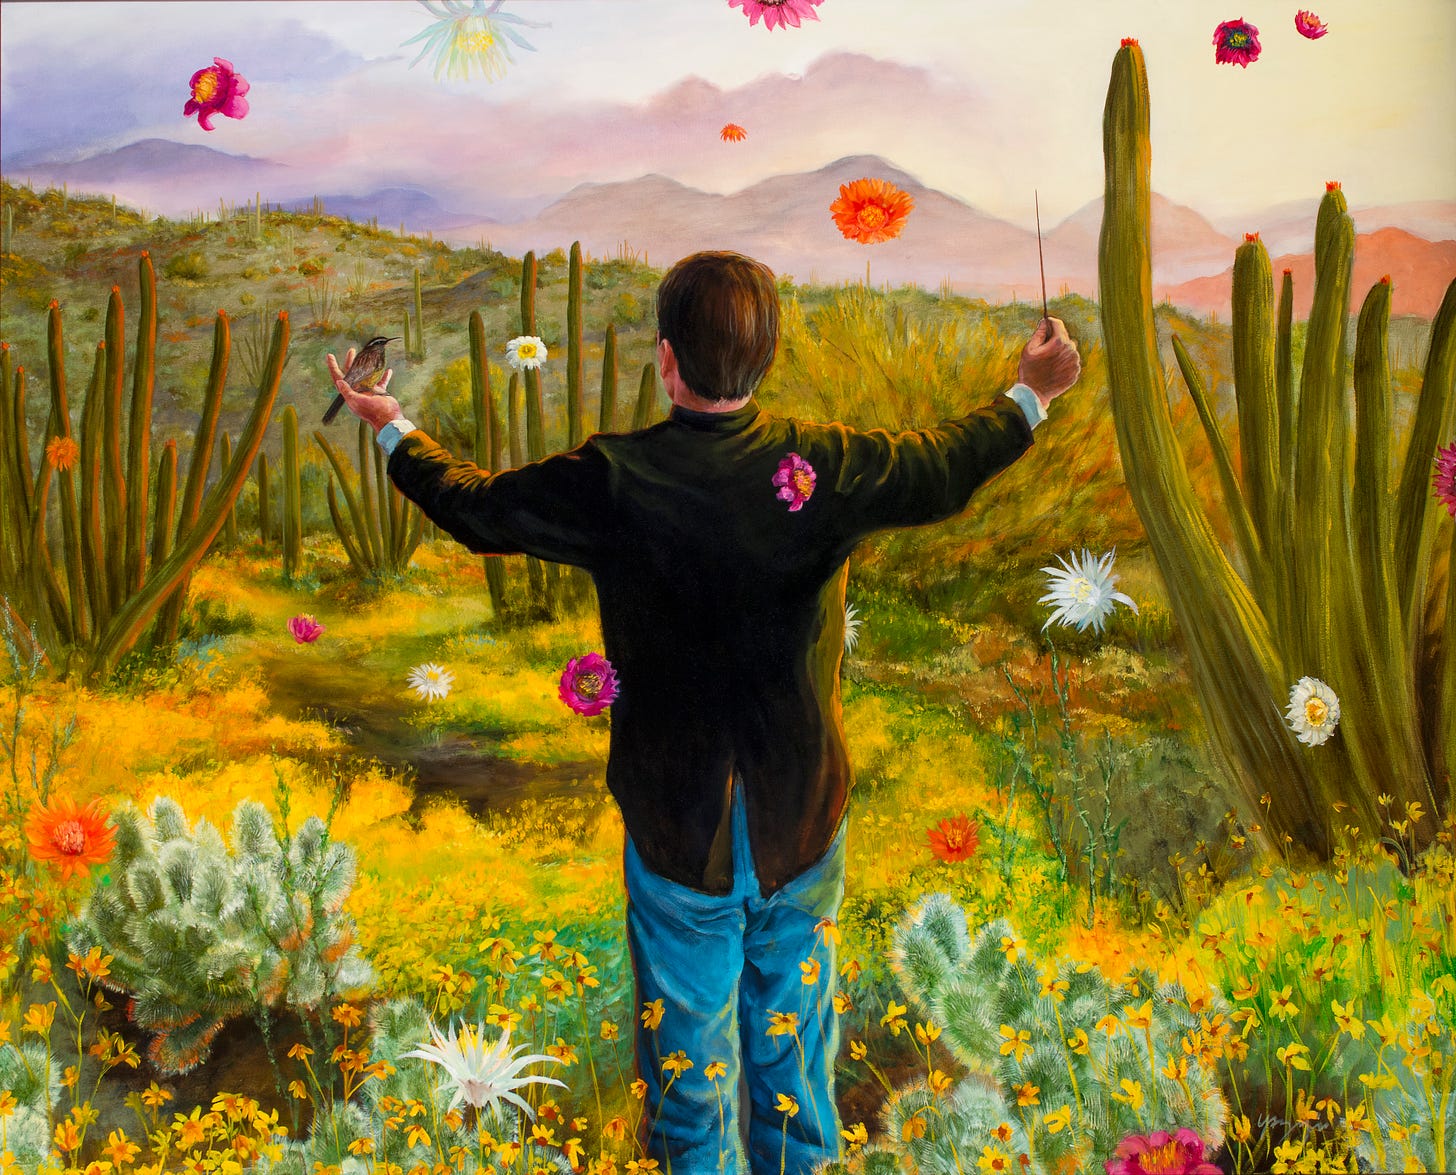 Steven Yazzie (Diné/Pueblo of Laguna, New Mexico/European descent), "Orchestrating a Blooming Desert," 2003, Oil on canvas, Collection of Christy Vezolles. © 2003 Steven J. Yazzie. All rights reserved. Courtesy of the Heard Museum, photo by Craig Smith